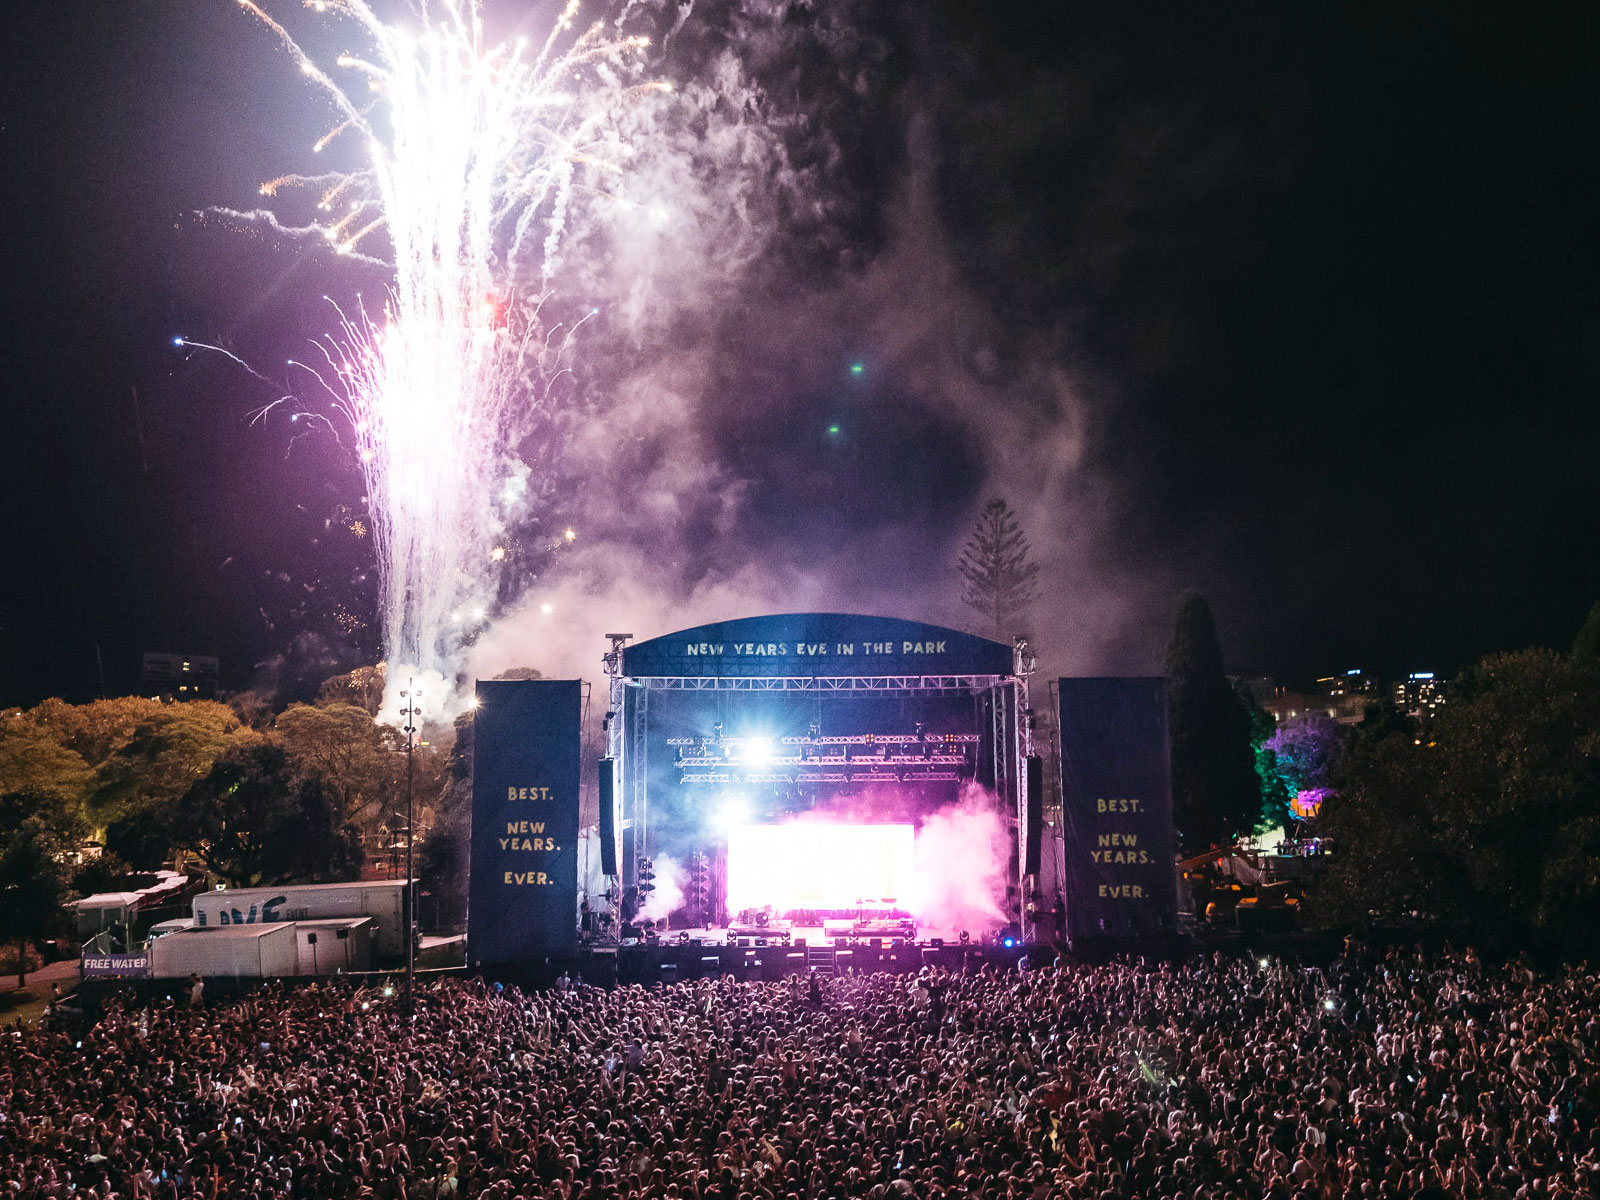 nye-in-the-park-sydney-2019-oz-edm-feature